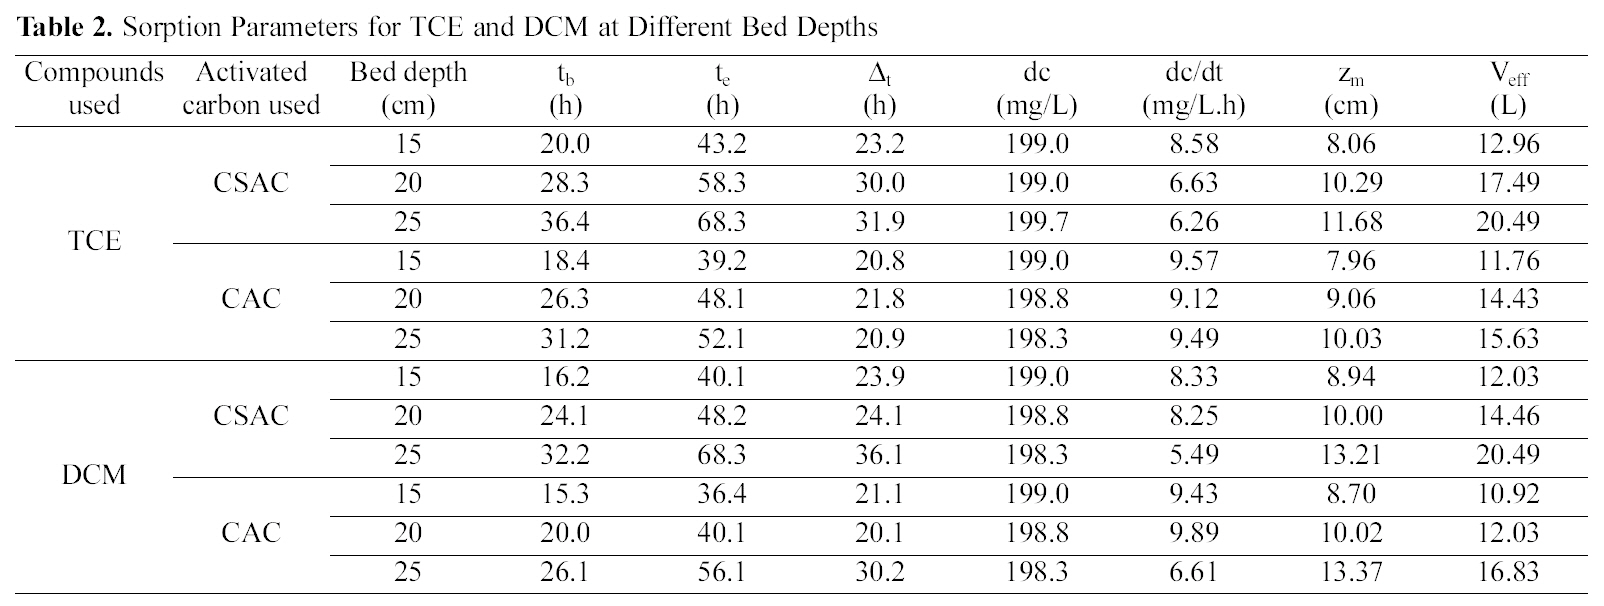 Sorption Parameters for TCE and DCM at Different Bed Depths